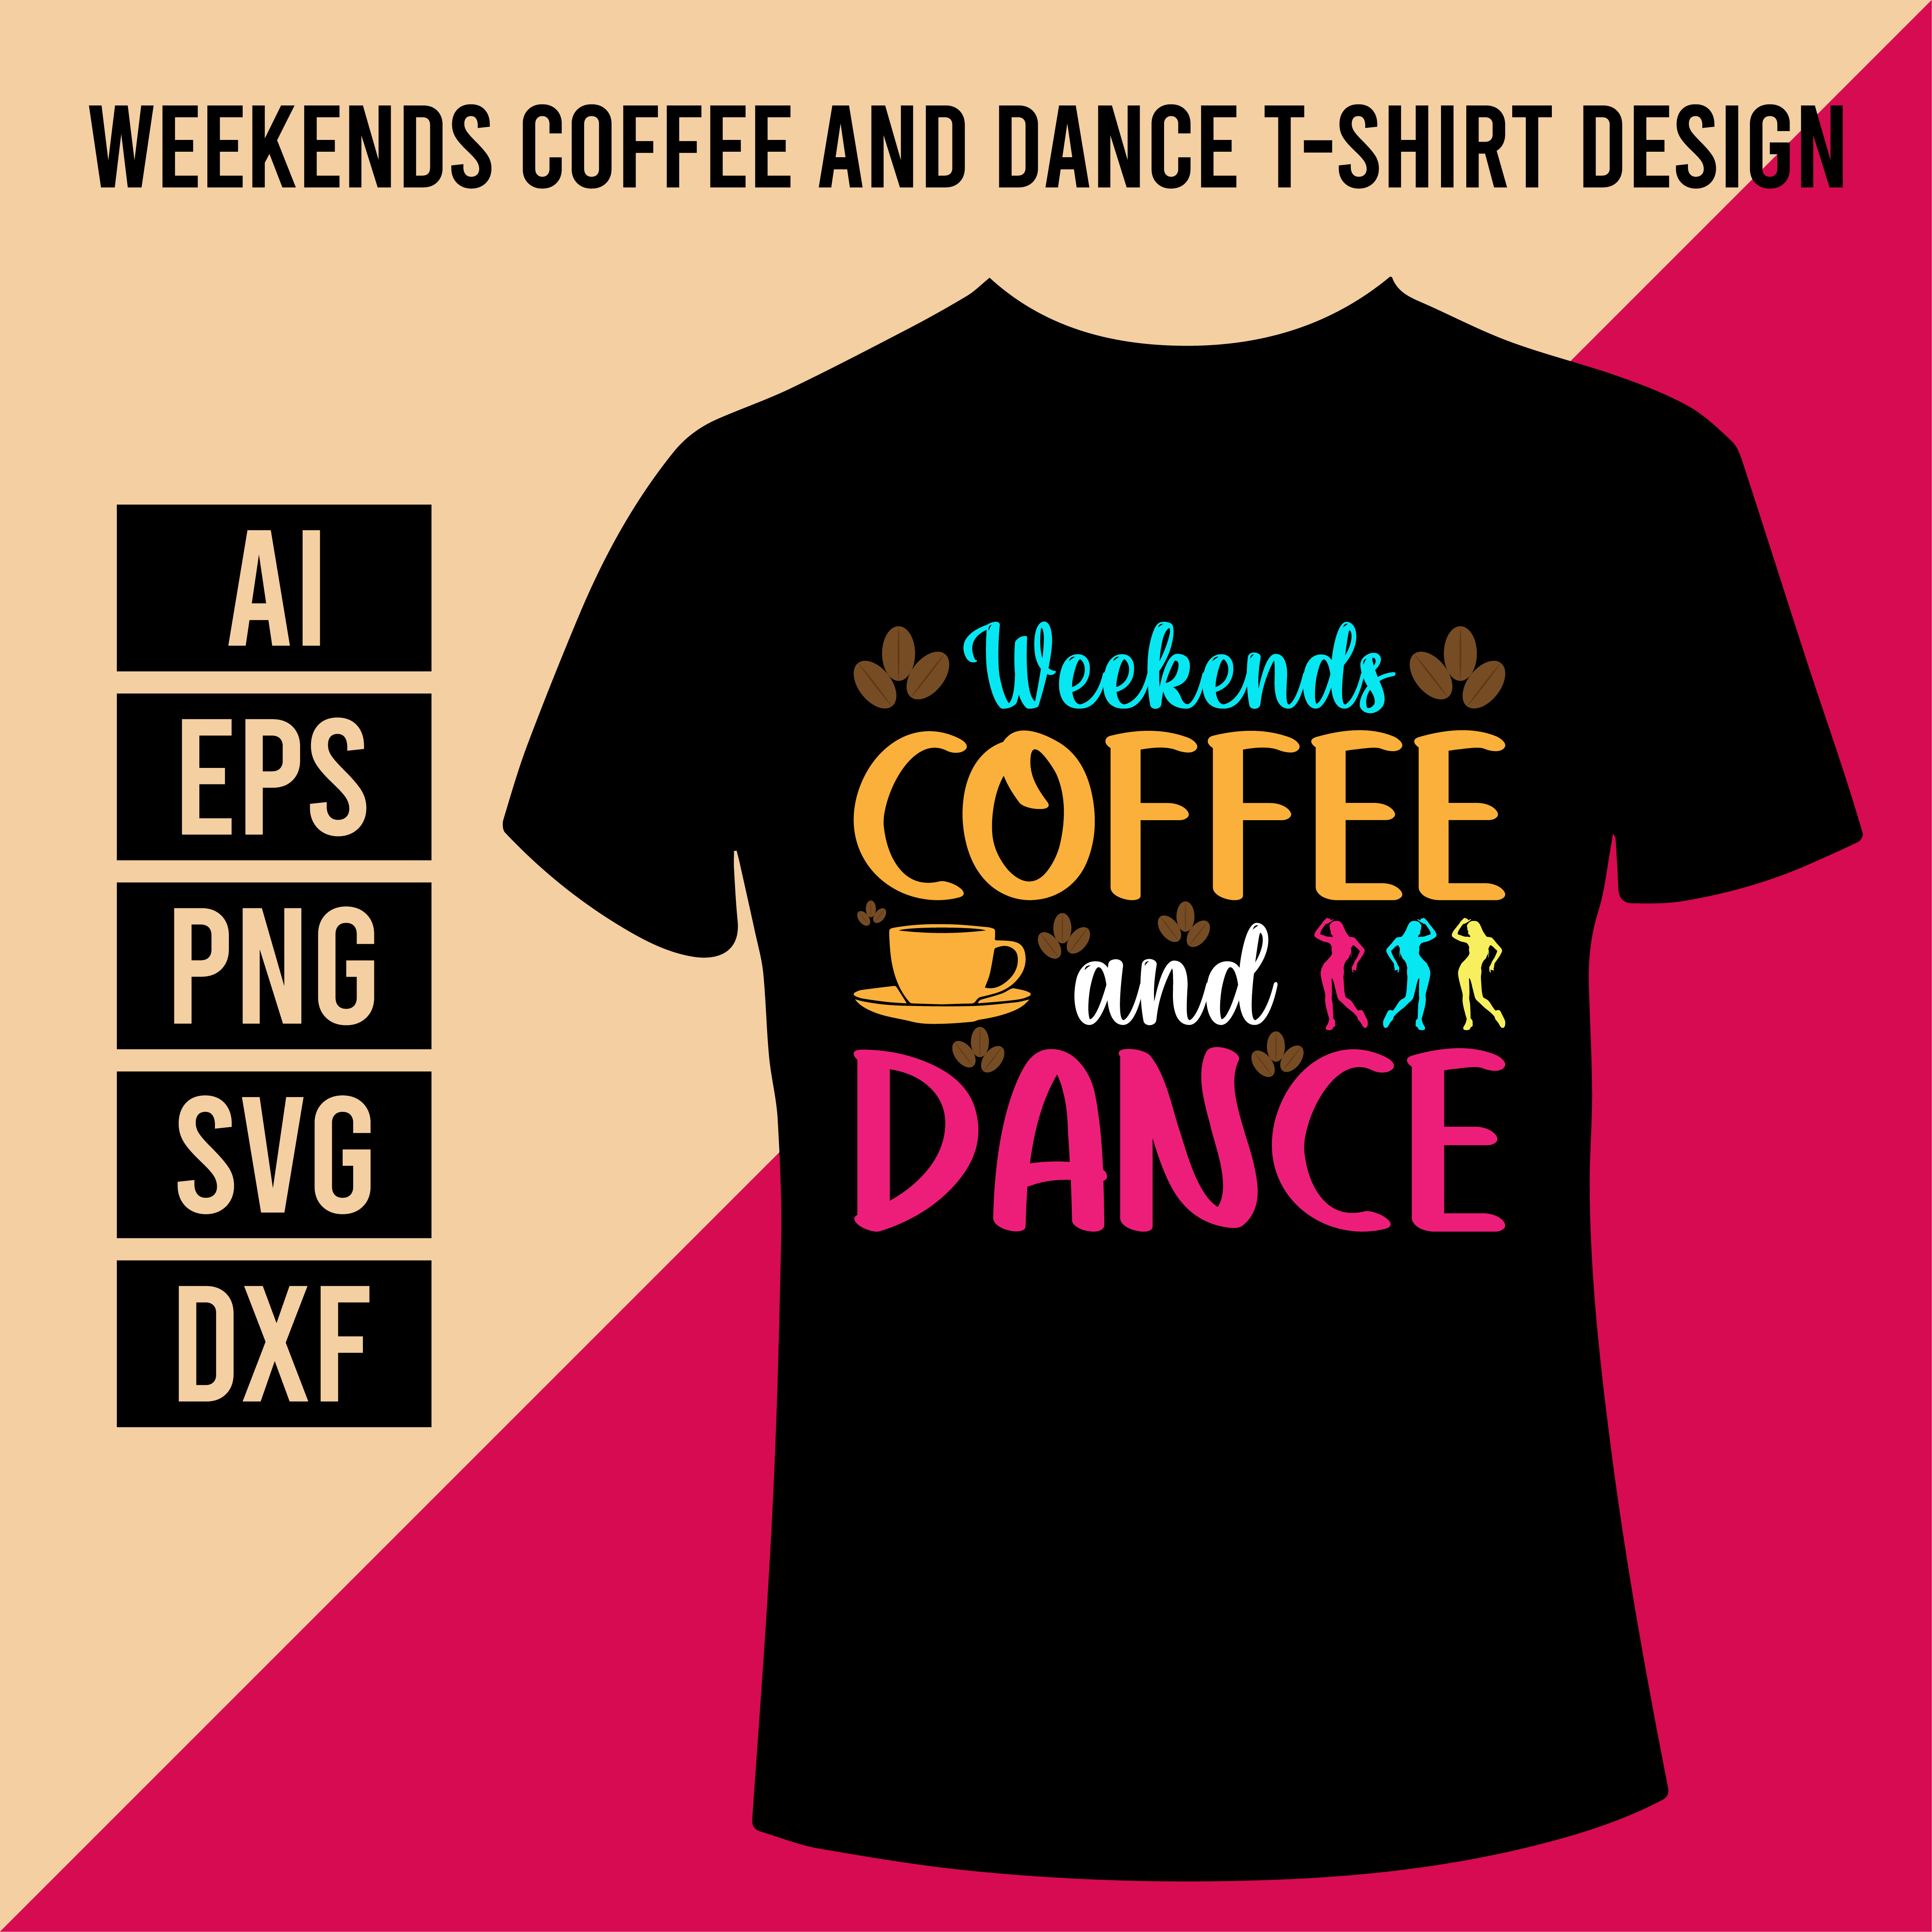 Weekends Coffee and Dance T-Shirt Design cover image.